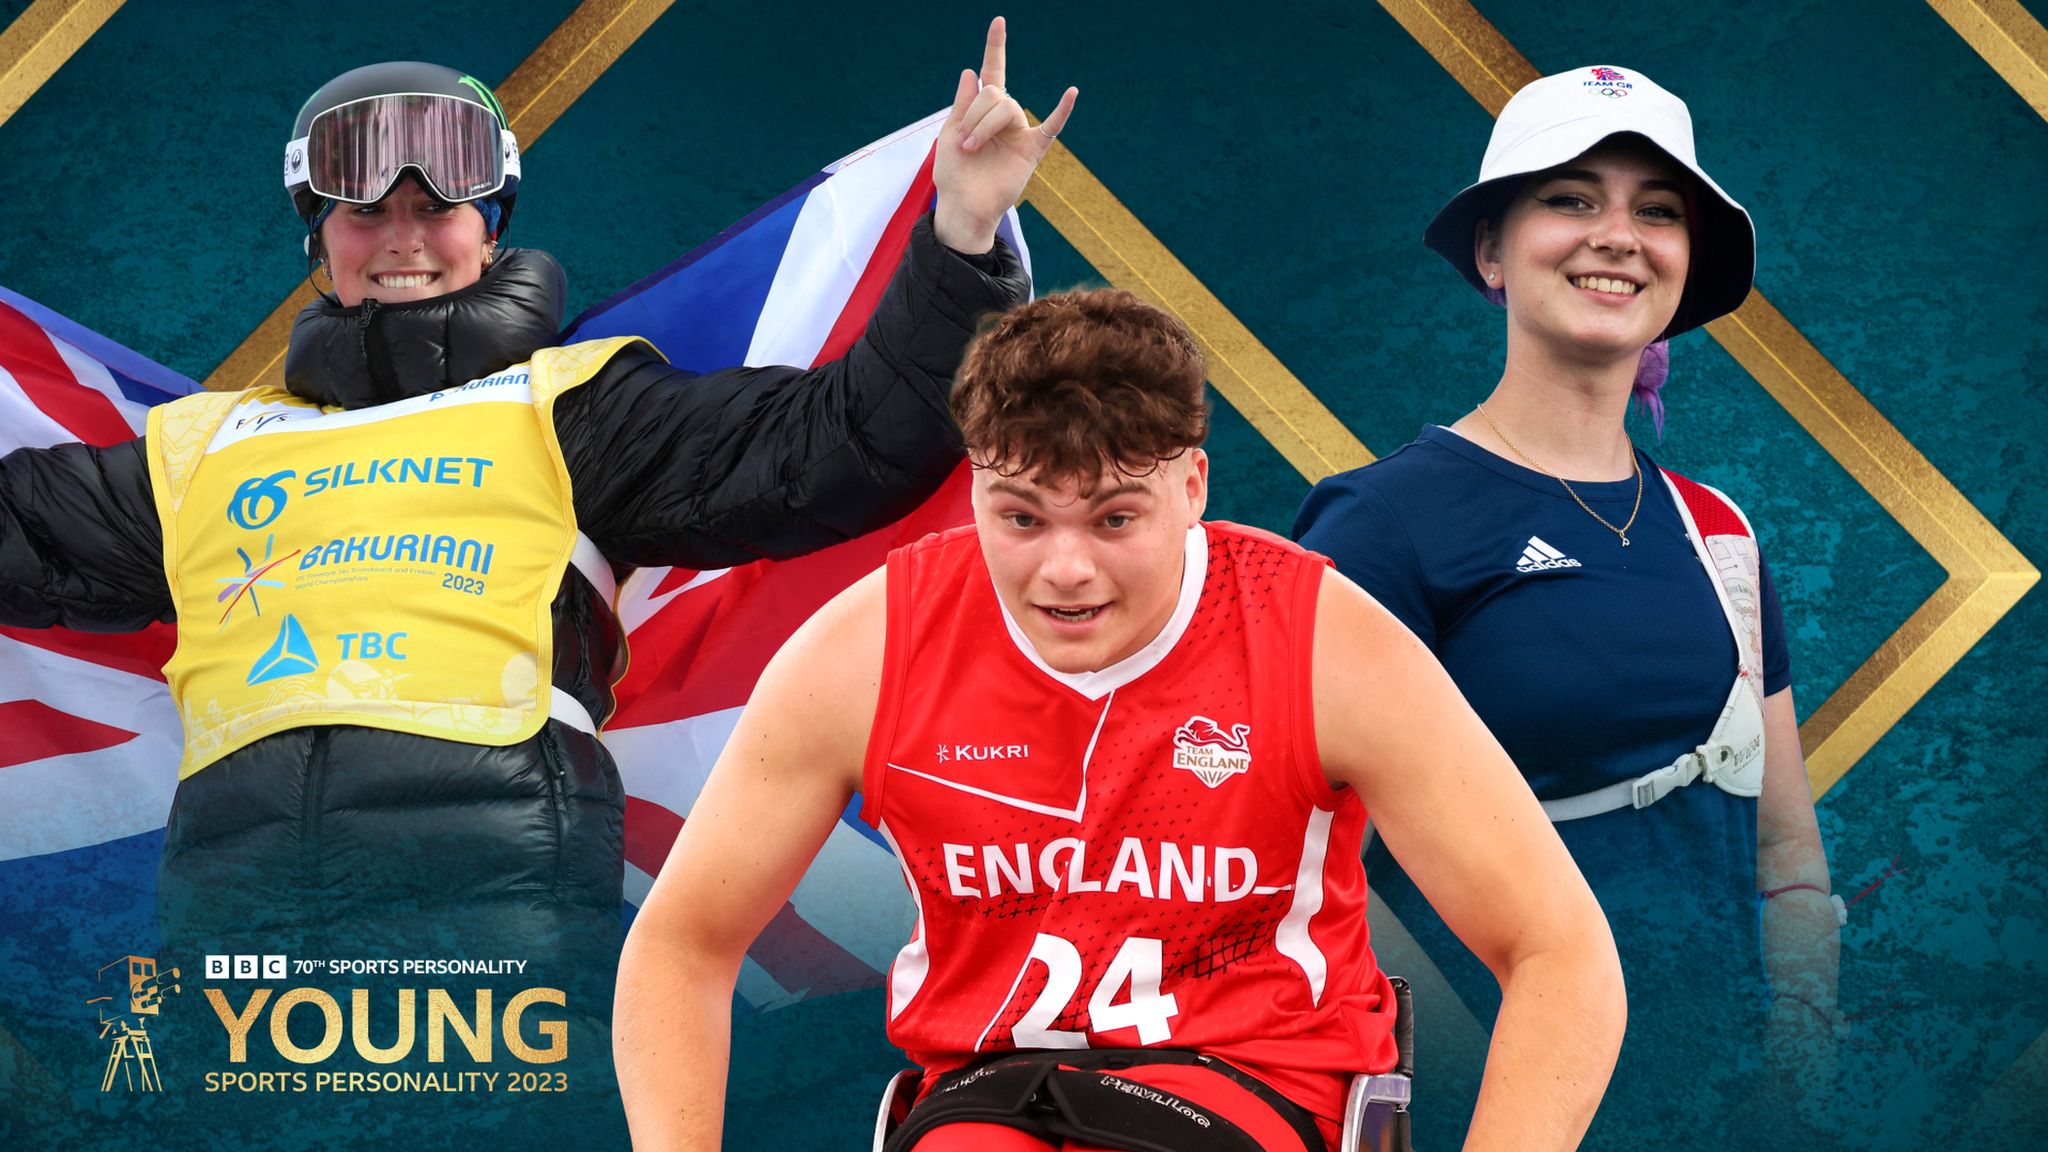 Snowboarder Mia Brookes, wheelchair basketball player Charlie McIntyre and archer Penny Healey have been shortlisted for Young Sports Personality of the Year